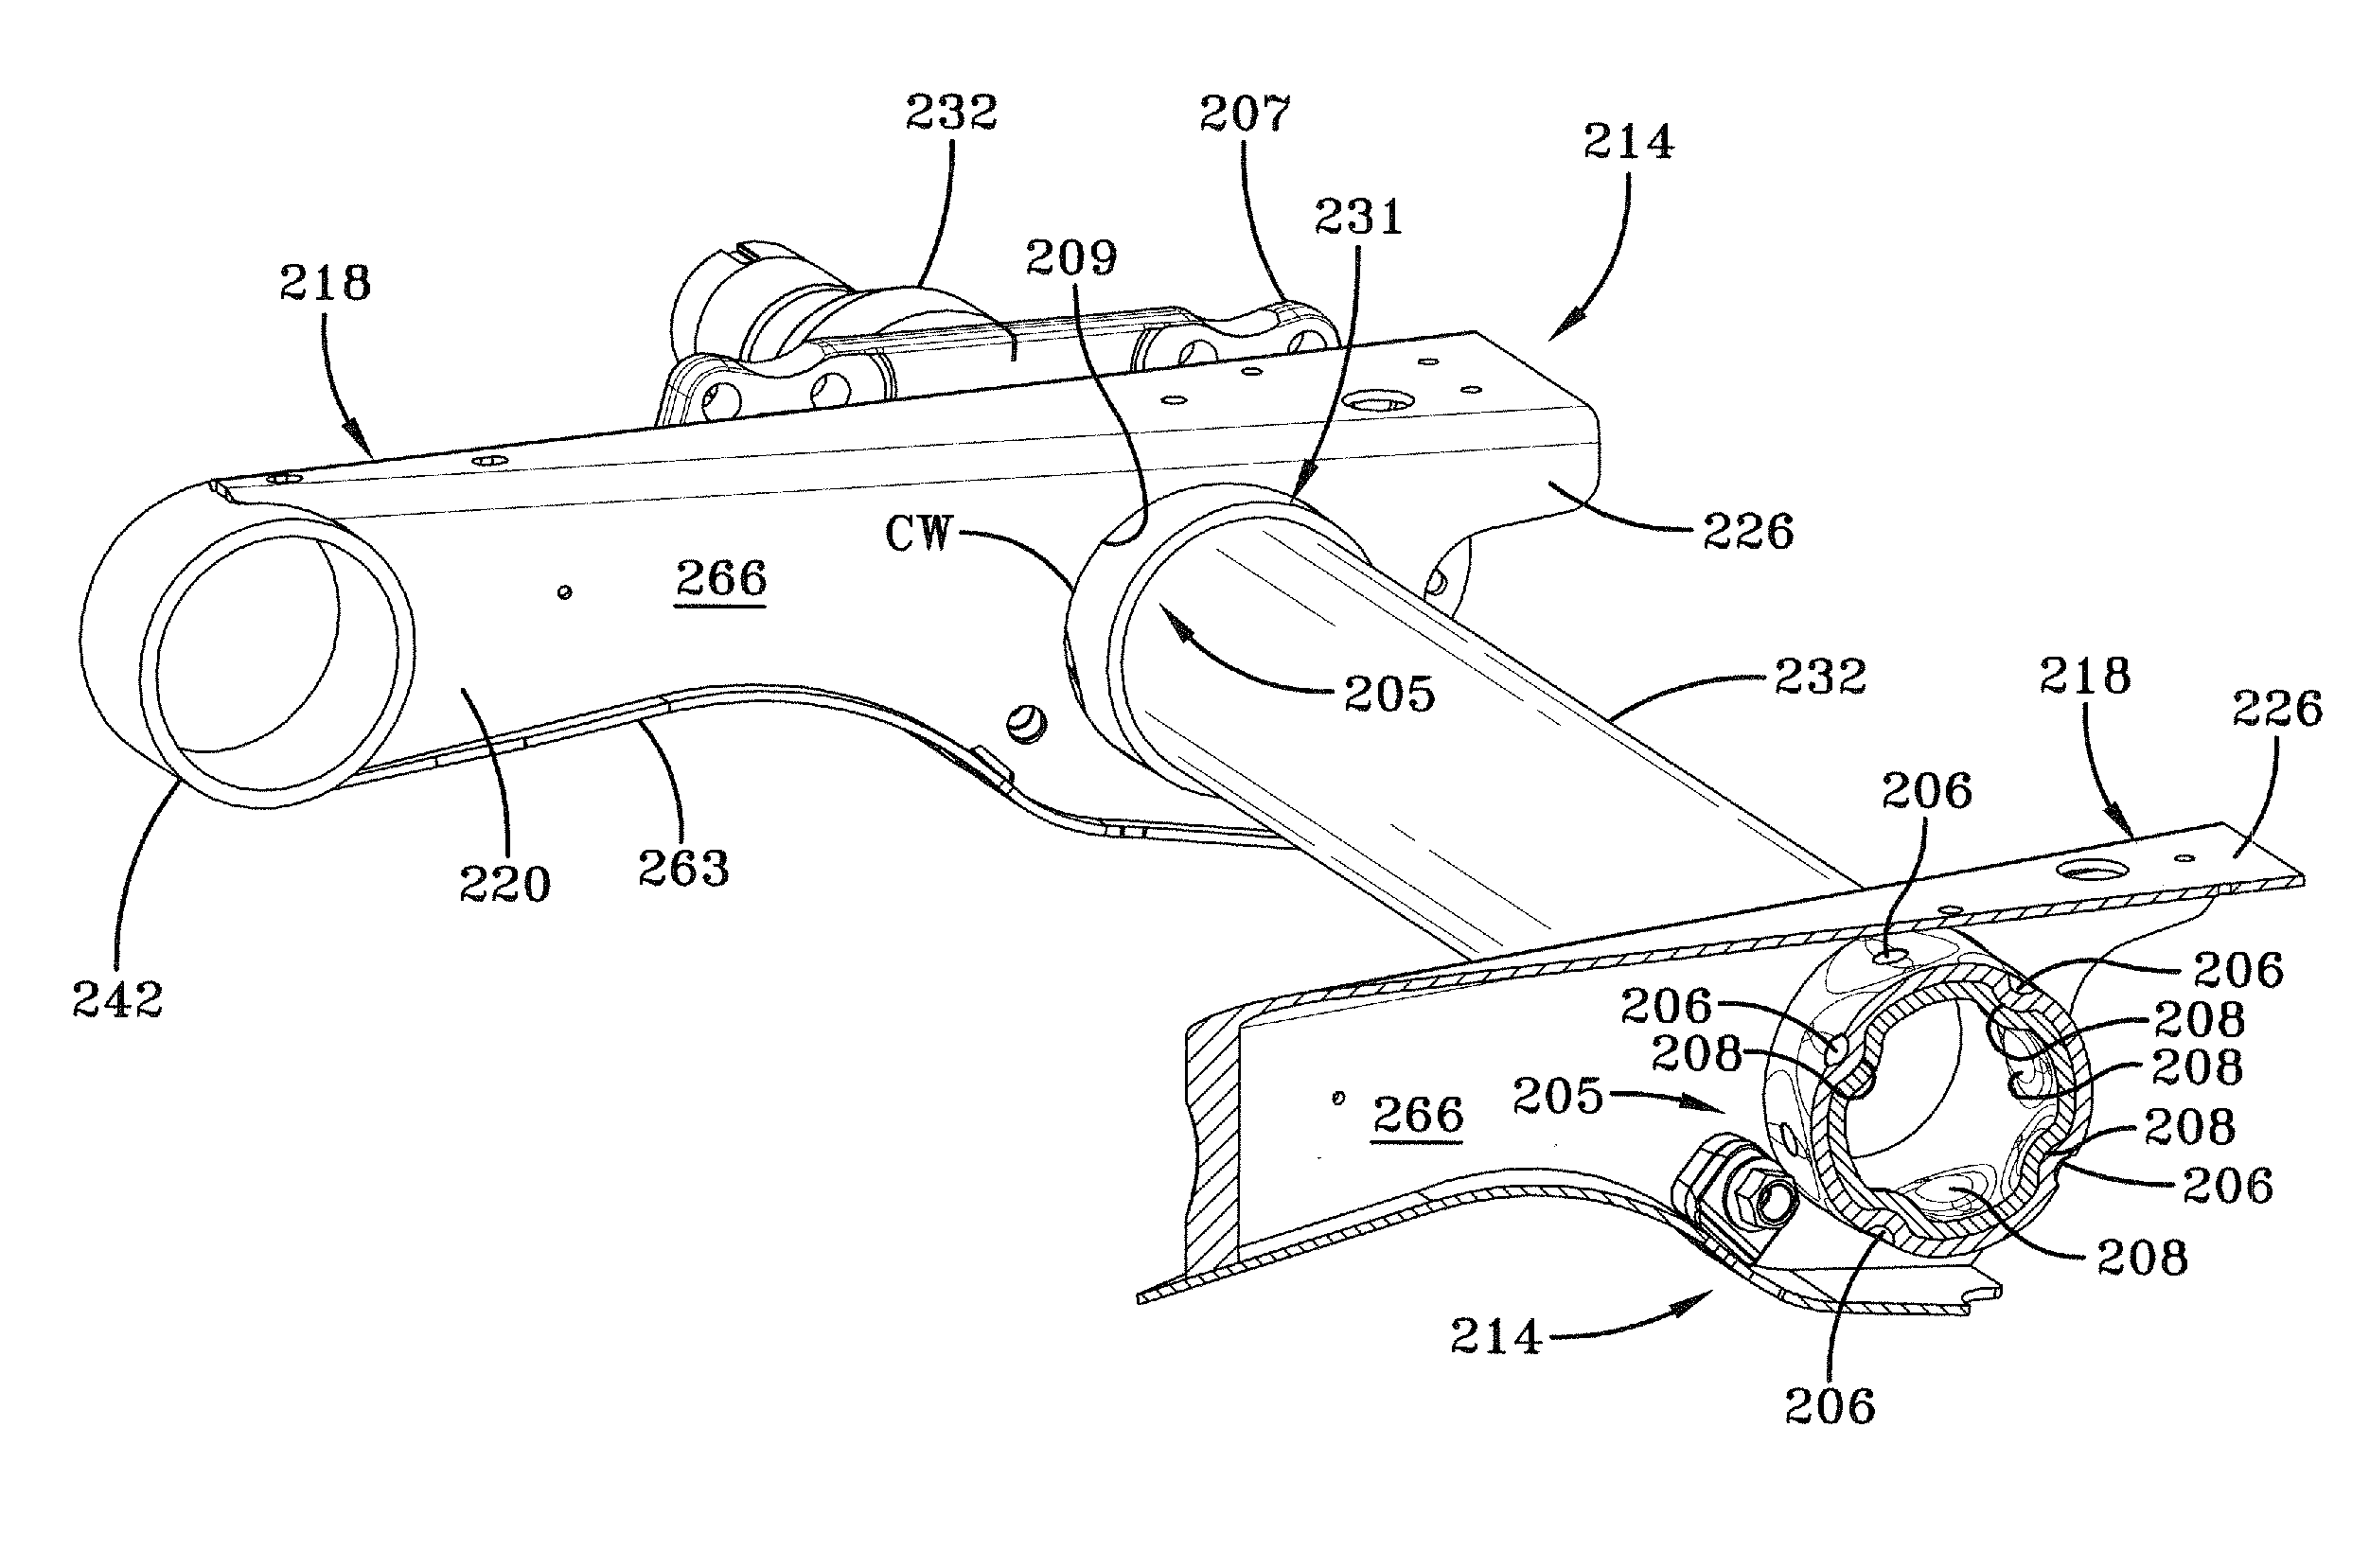 Heavy-duty axle-to-beam connection